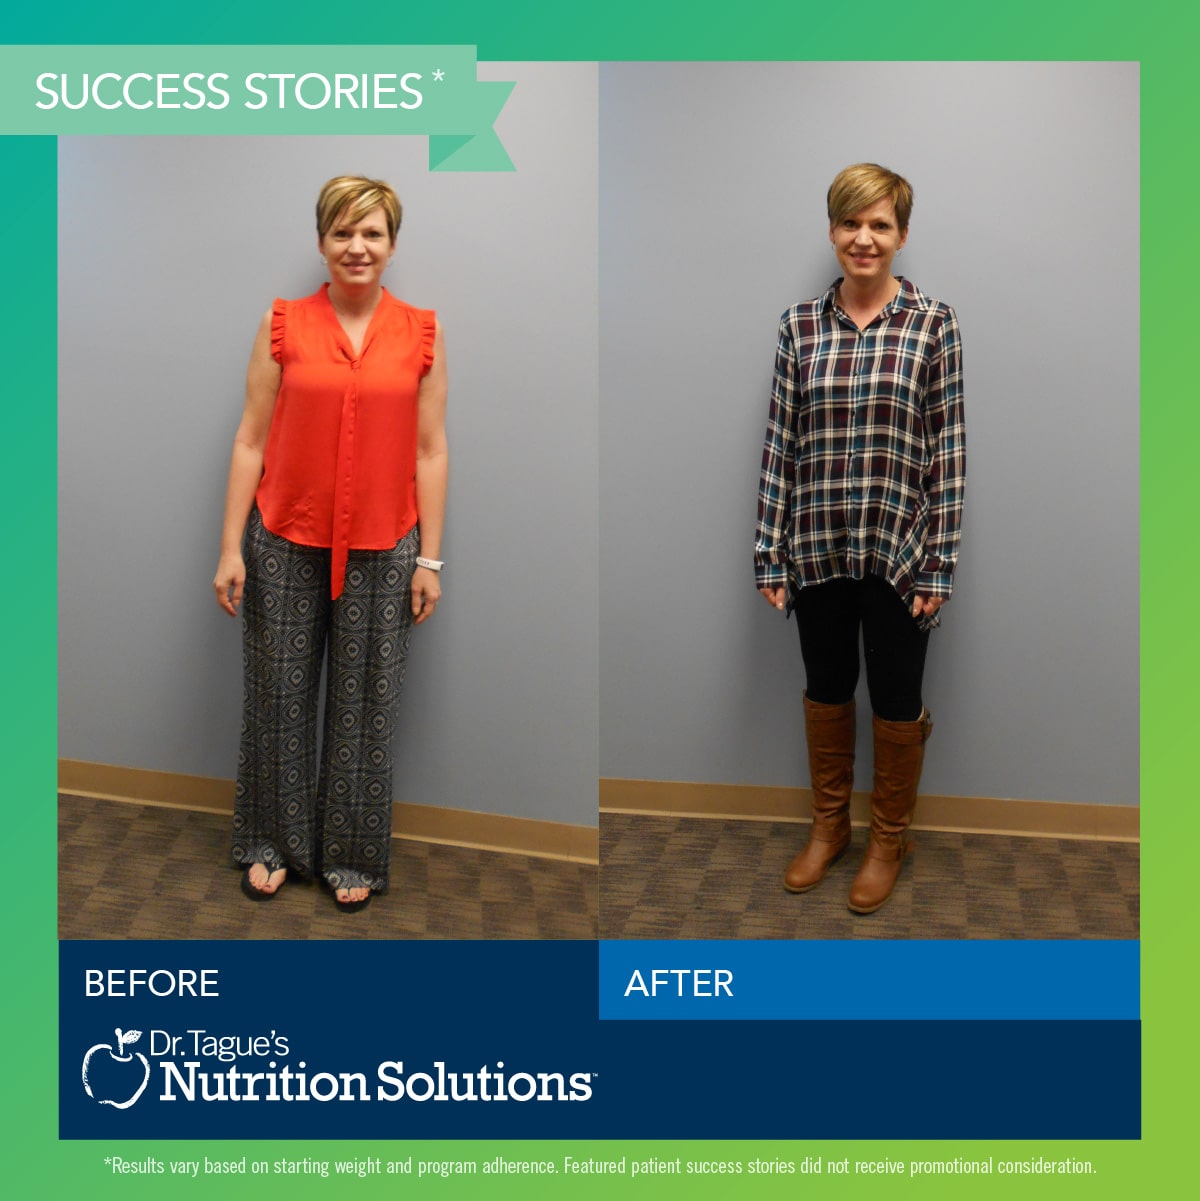 Dr. Tague's Center for Nutrition Success Stories - Melissa lost 25lbs in 13 weeks